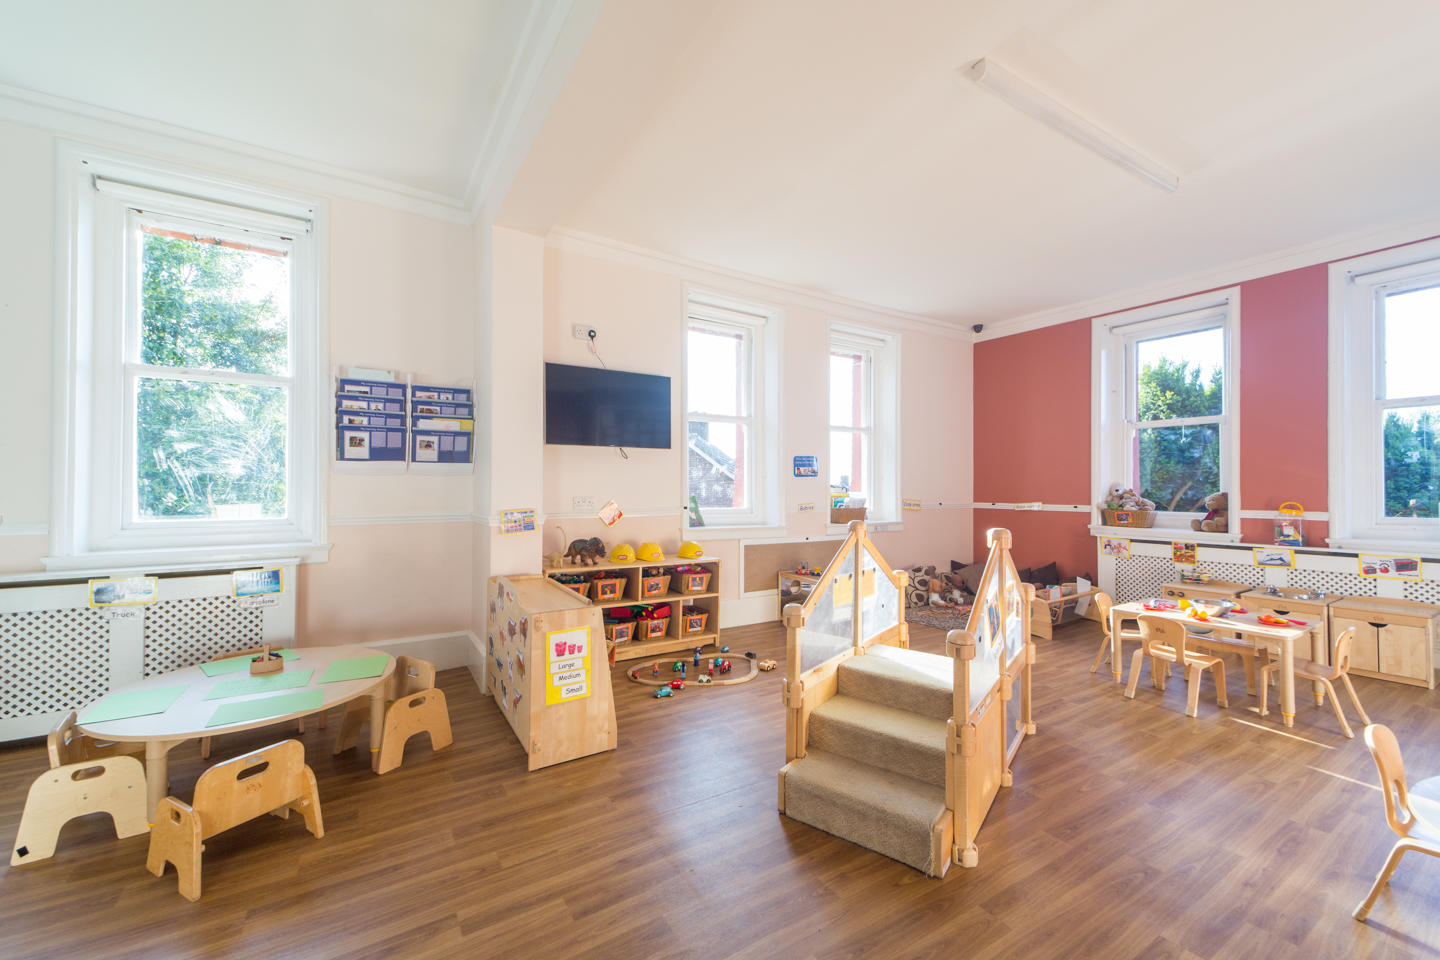 Bright Horizons Enfield Hilly Fields Day Nursery and Preschool Enfield 03334 552533